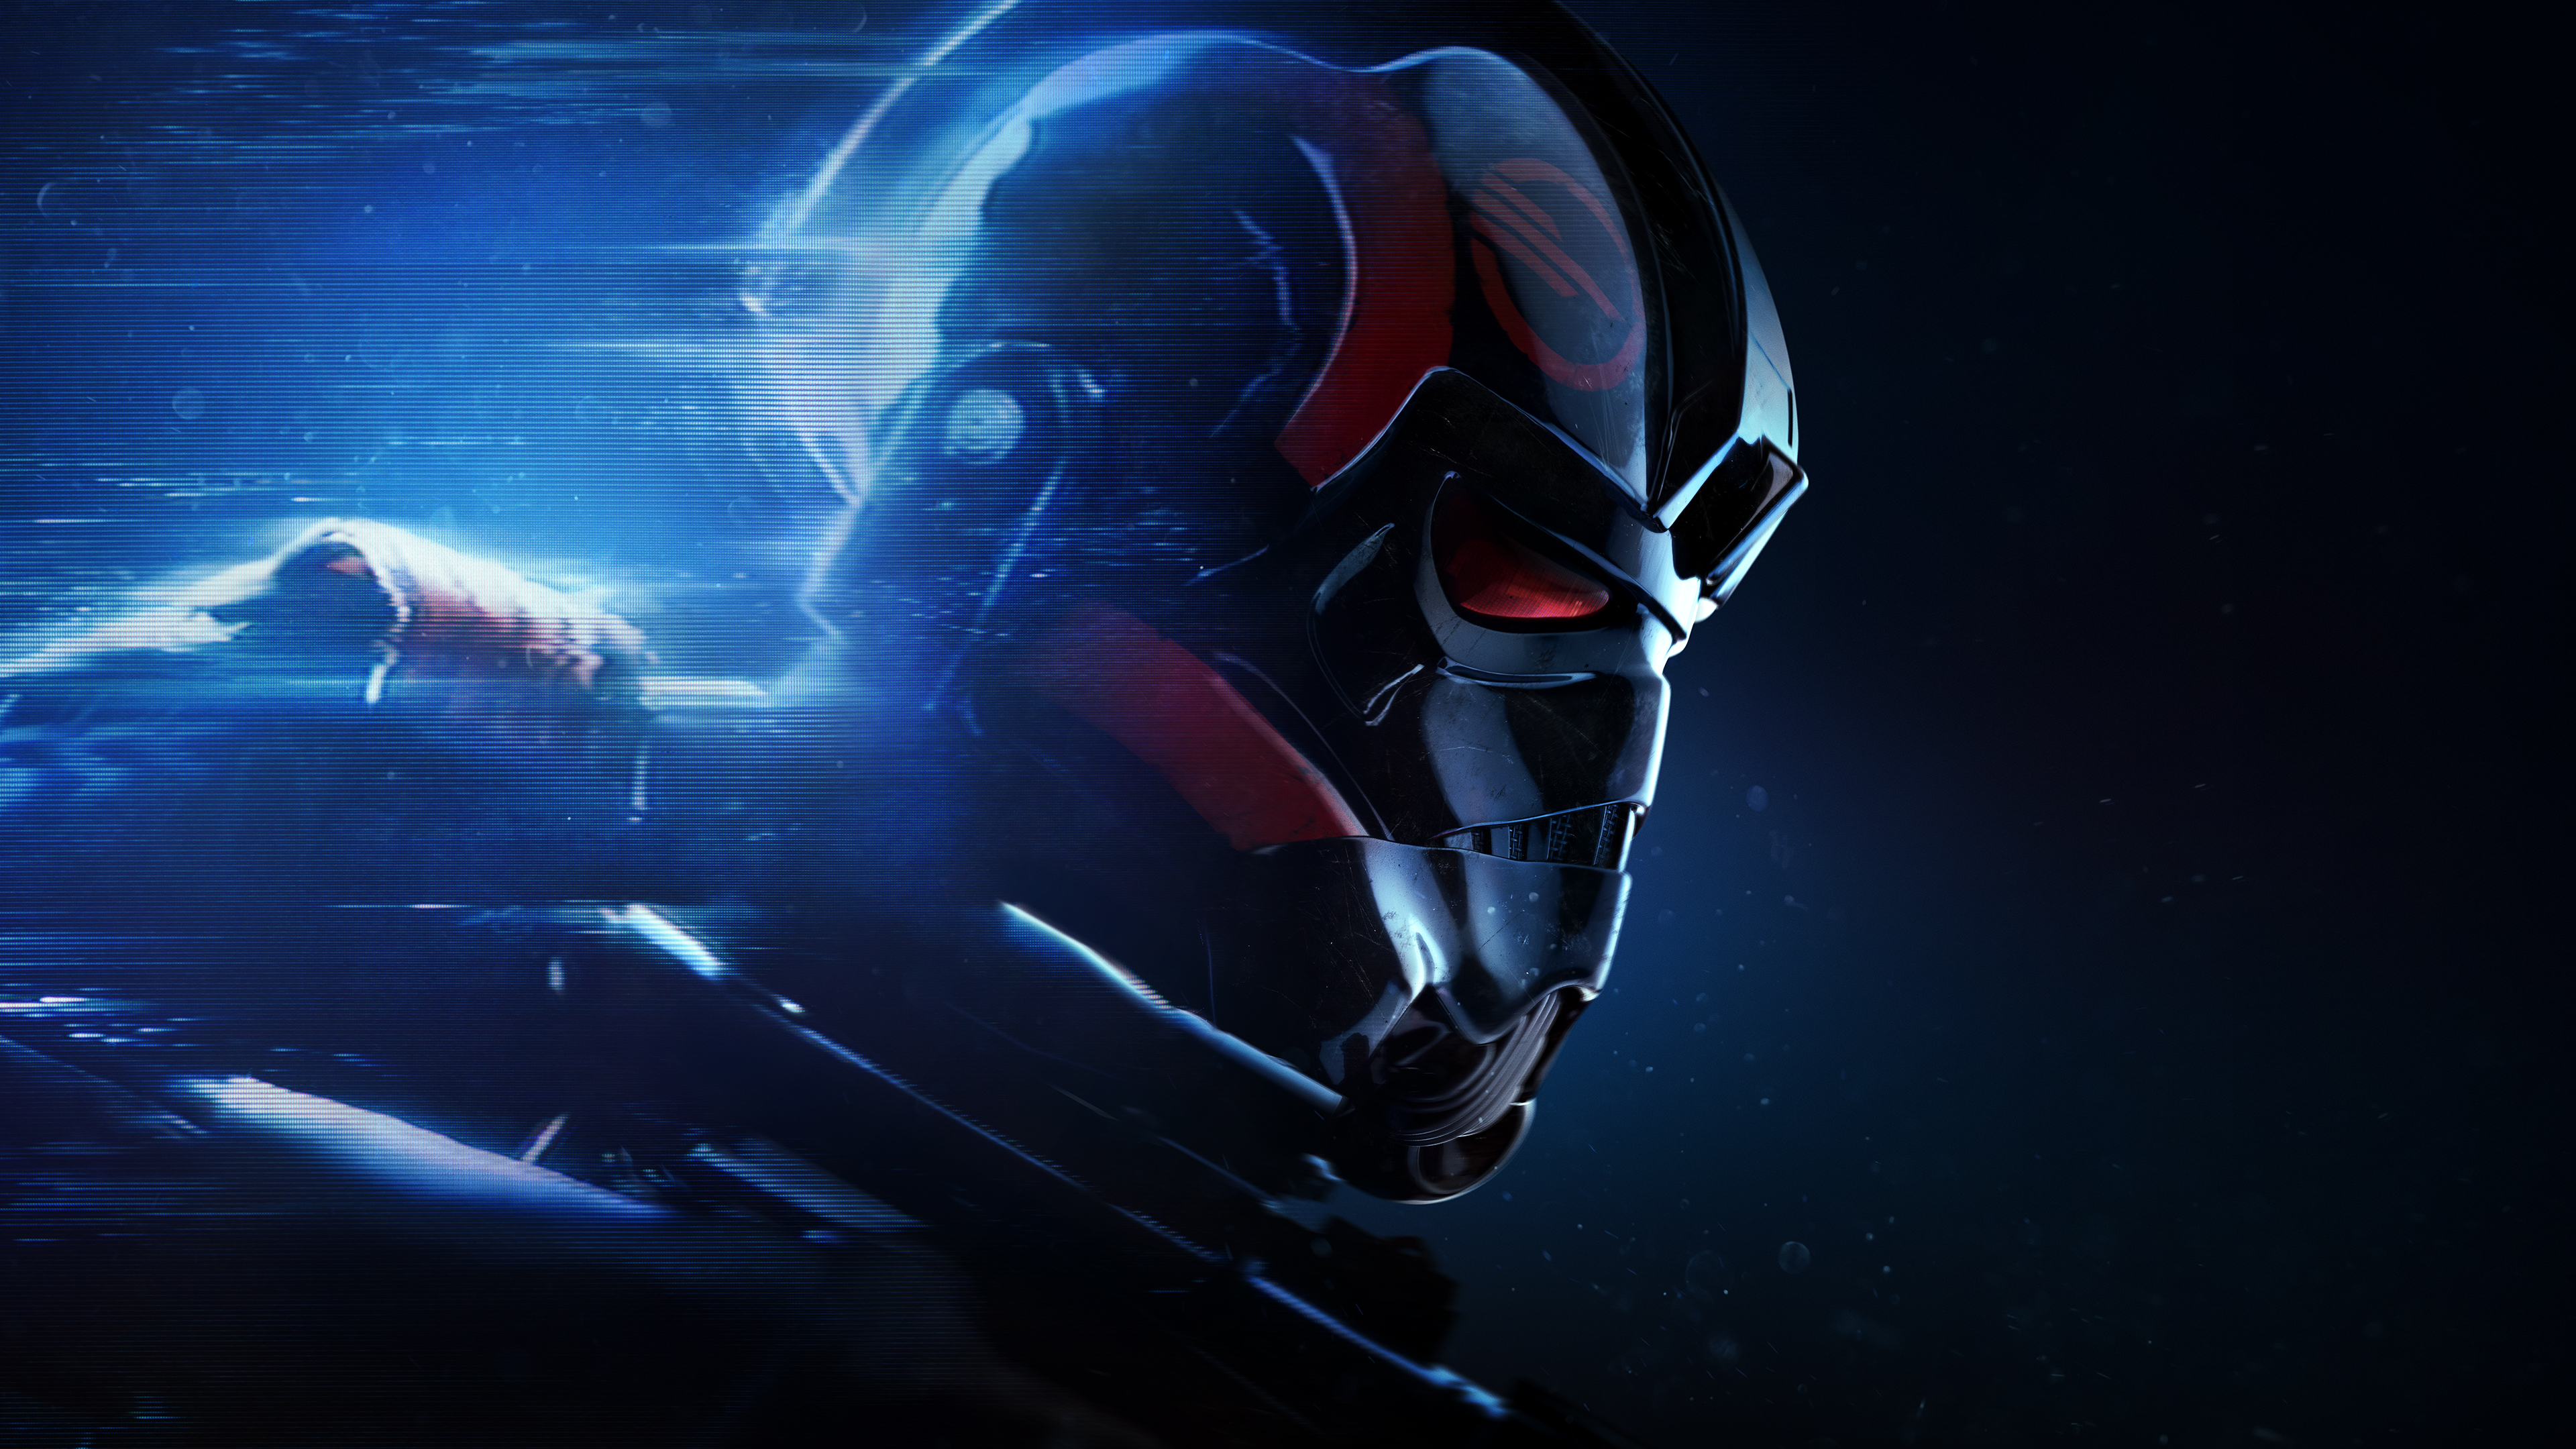 Star wars battlefront ii hd wallpapers hd images backgrounds